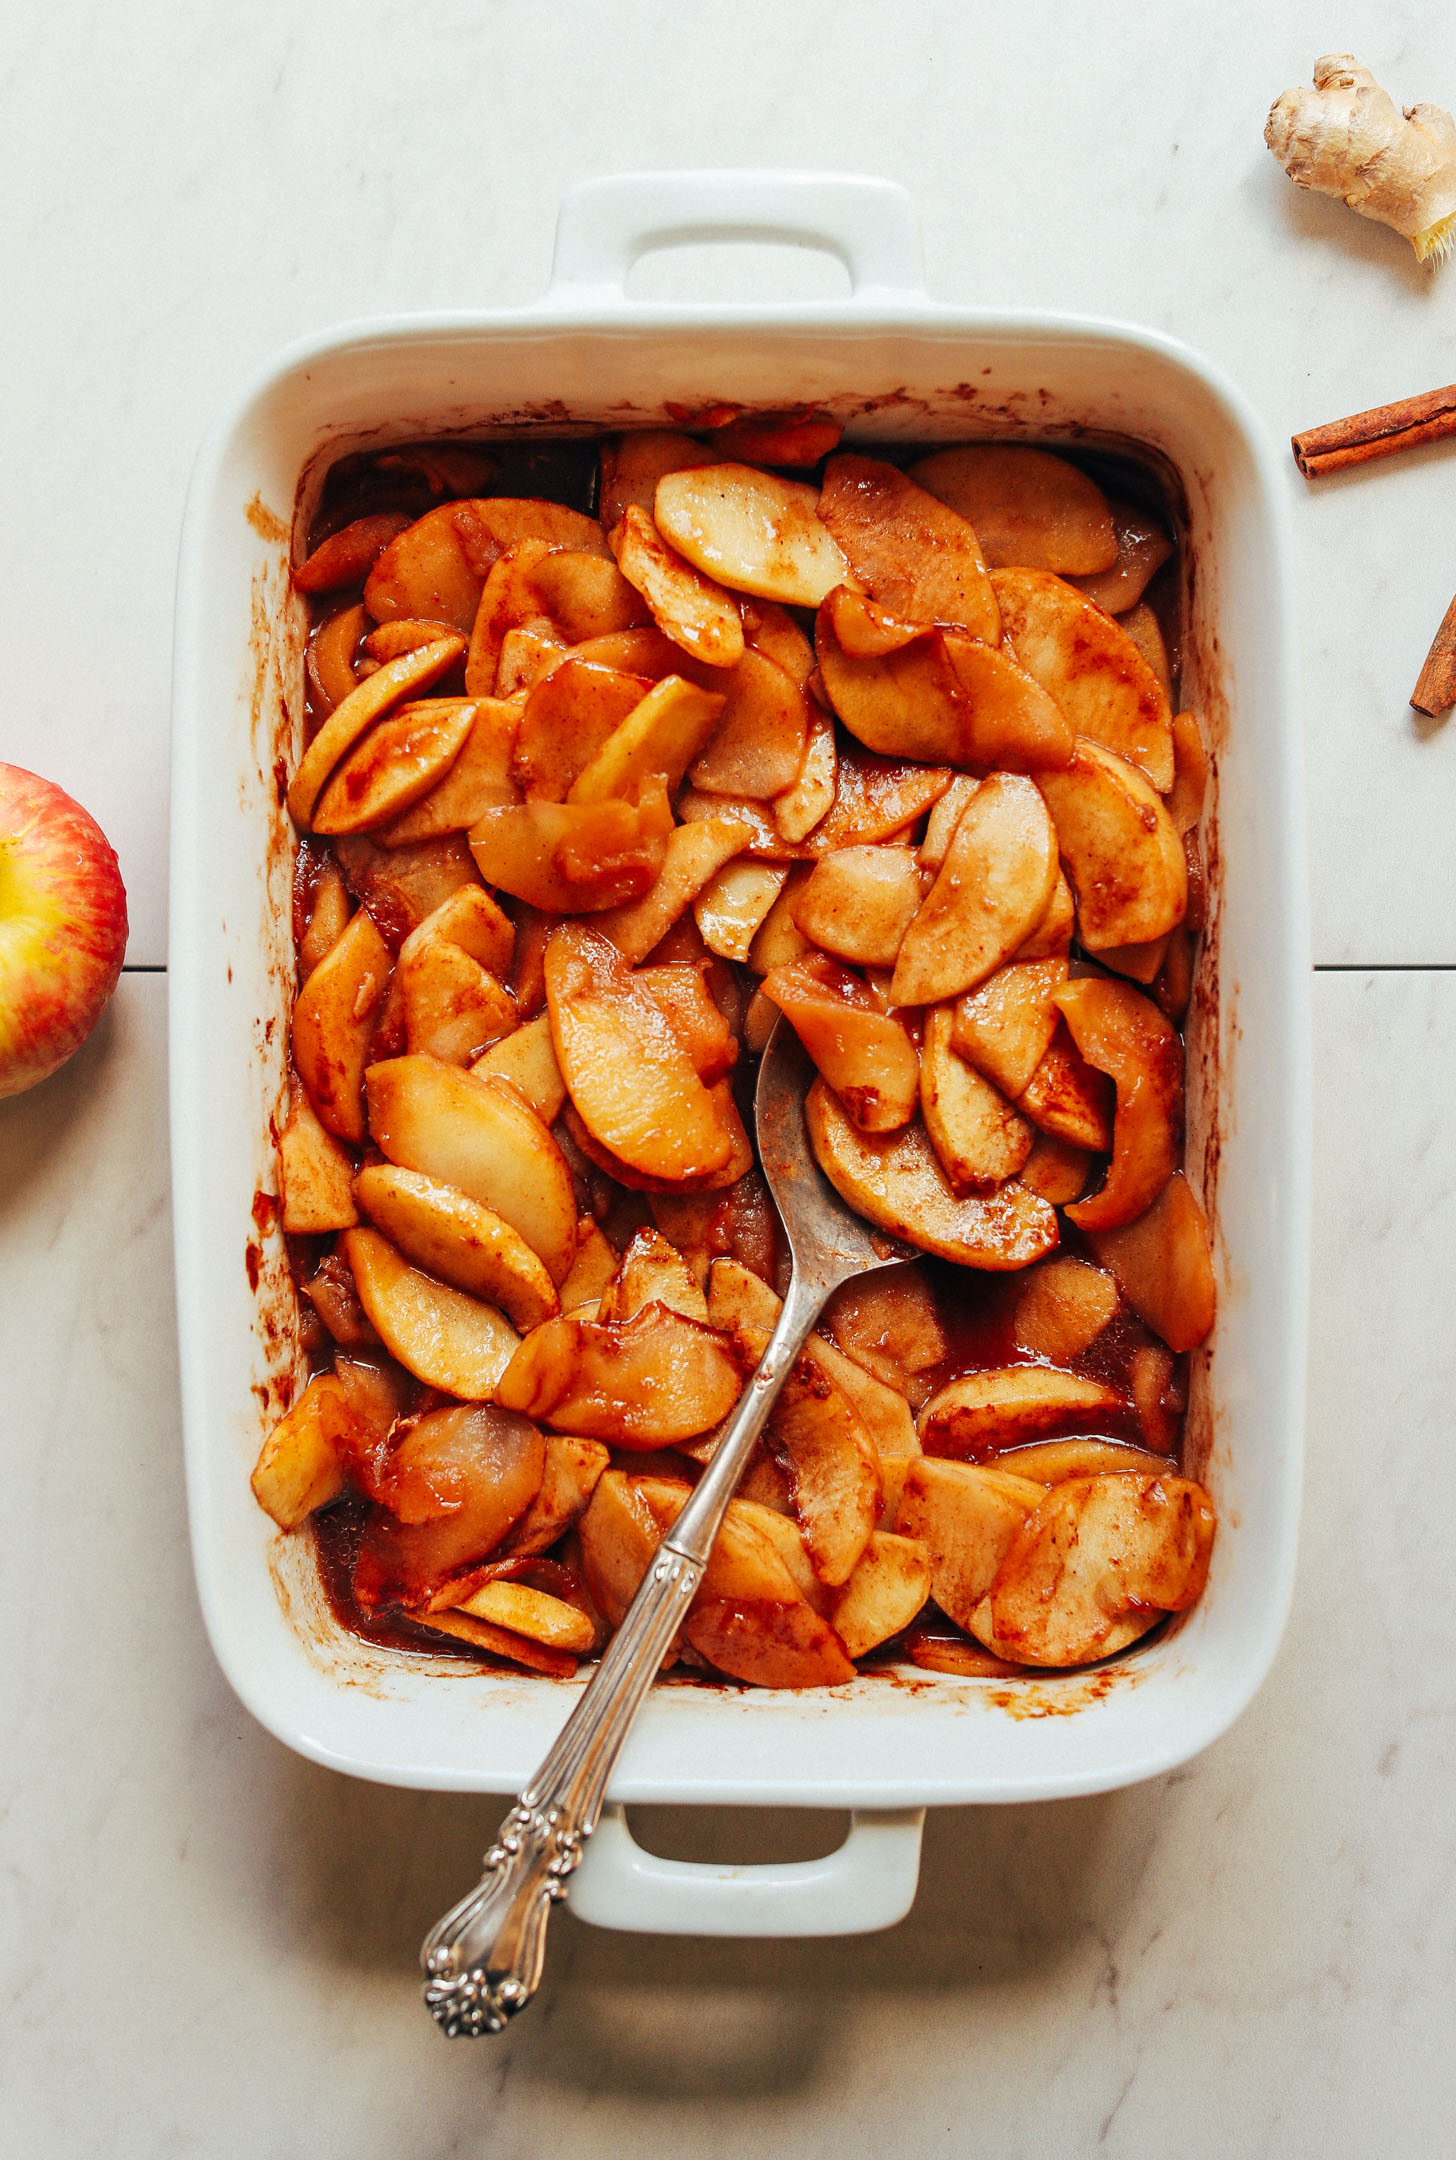 Freshly stirred sliced apples with spices for making naturally-sweetened Cinnamon Baked Apples